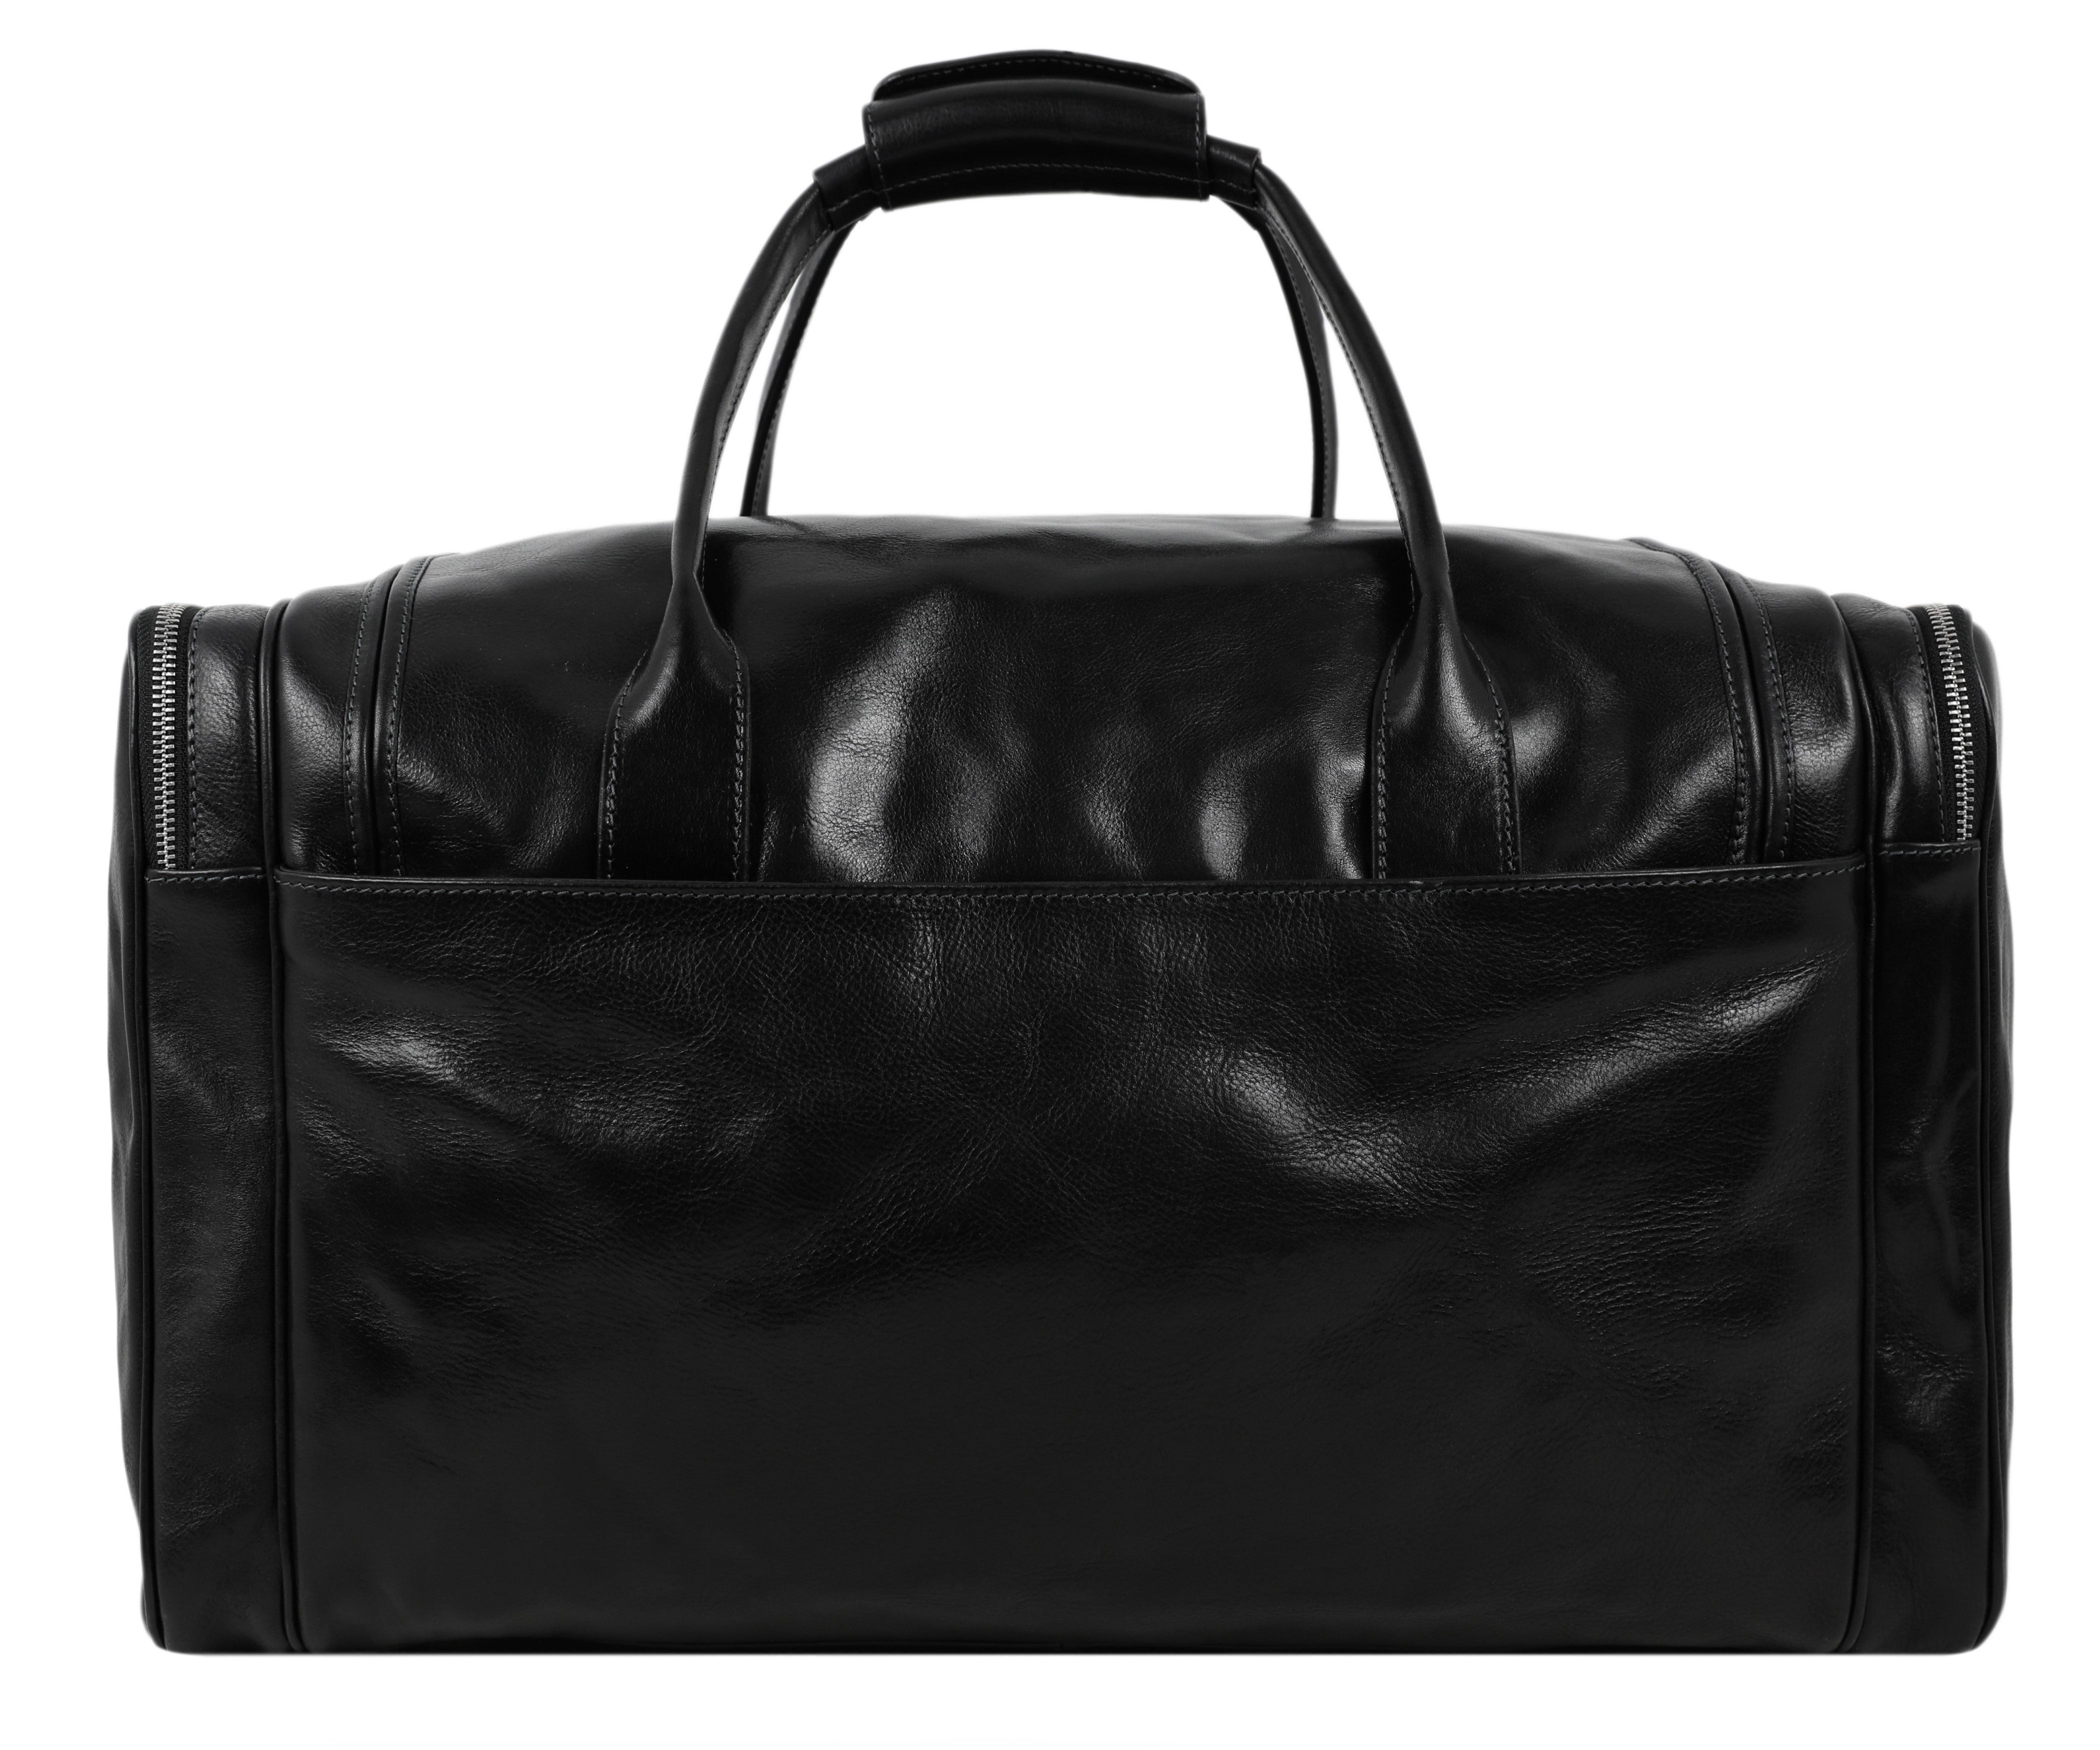 Large Italian Leather Duffel Bag - The Hitchhikers Guide to the Galaxy